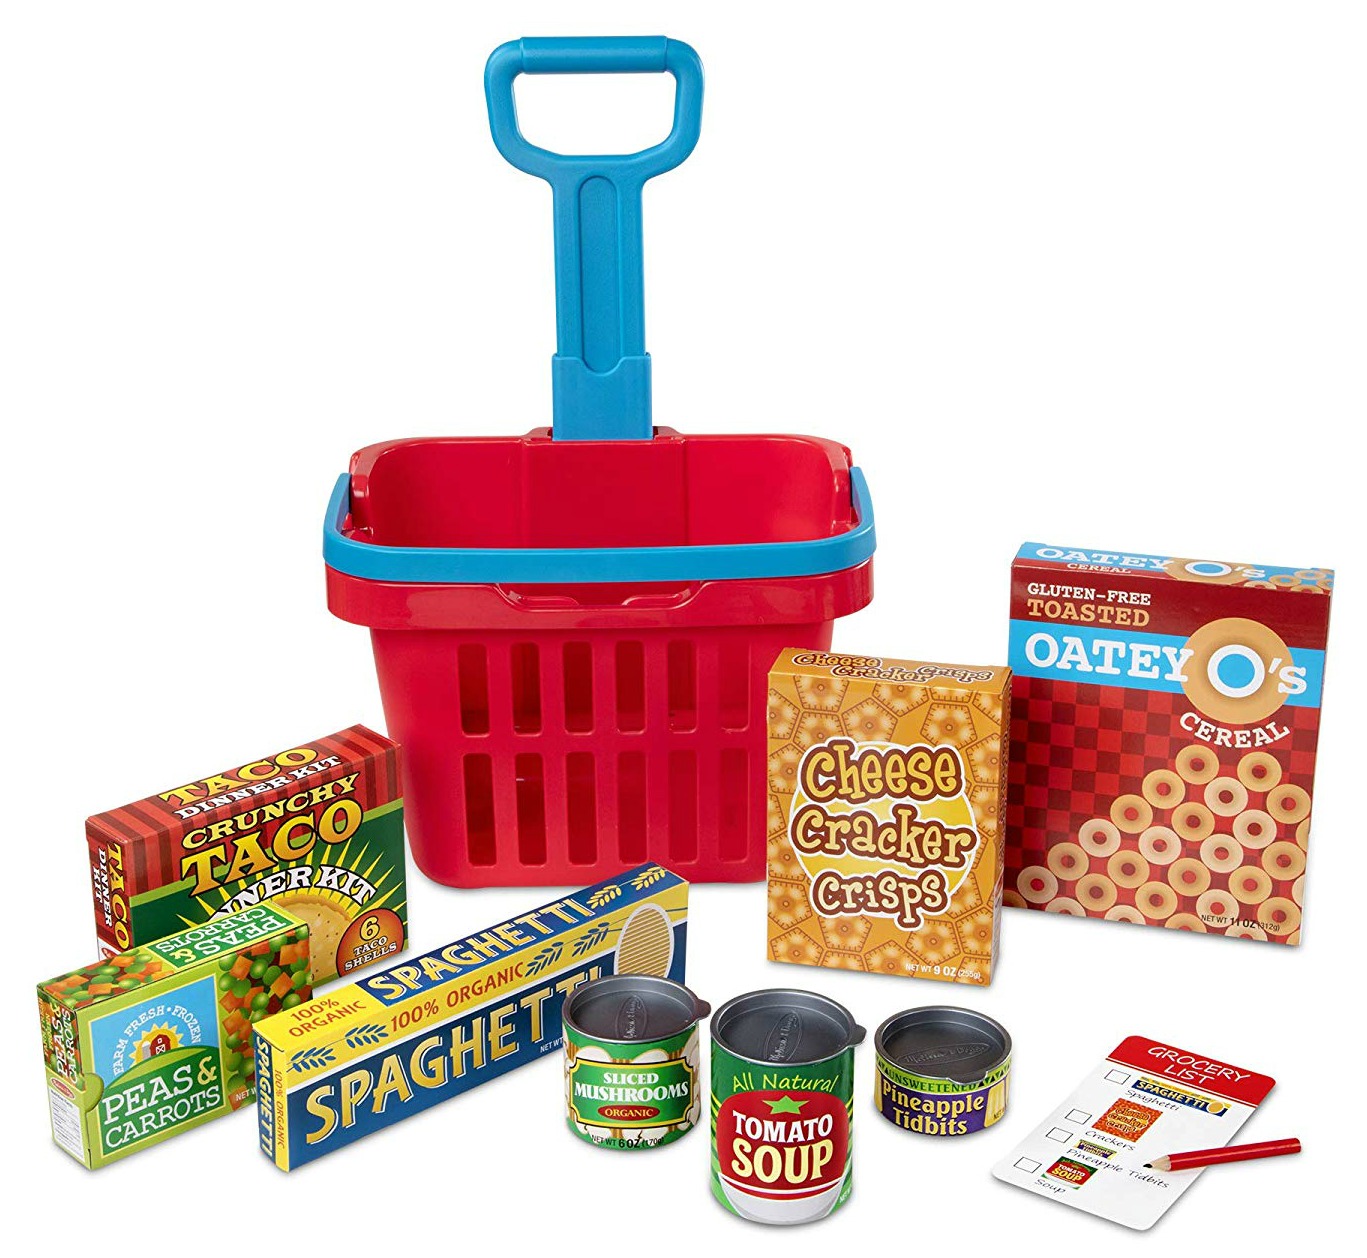 Melissa & Doug toy grocery basket with play food